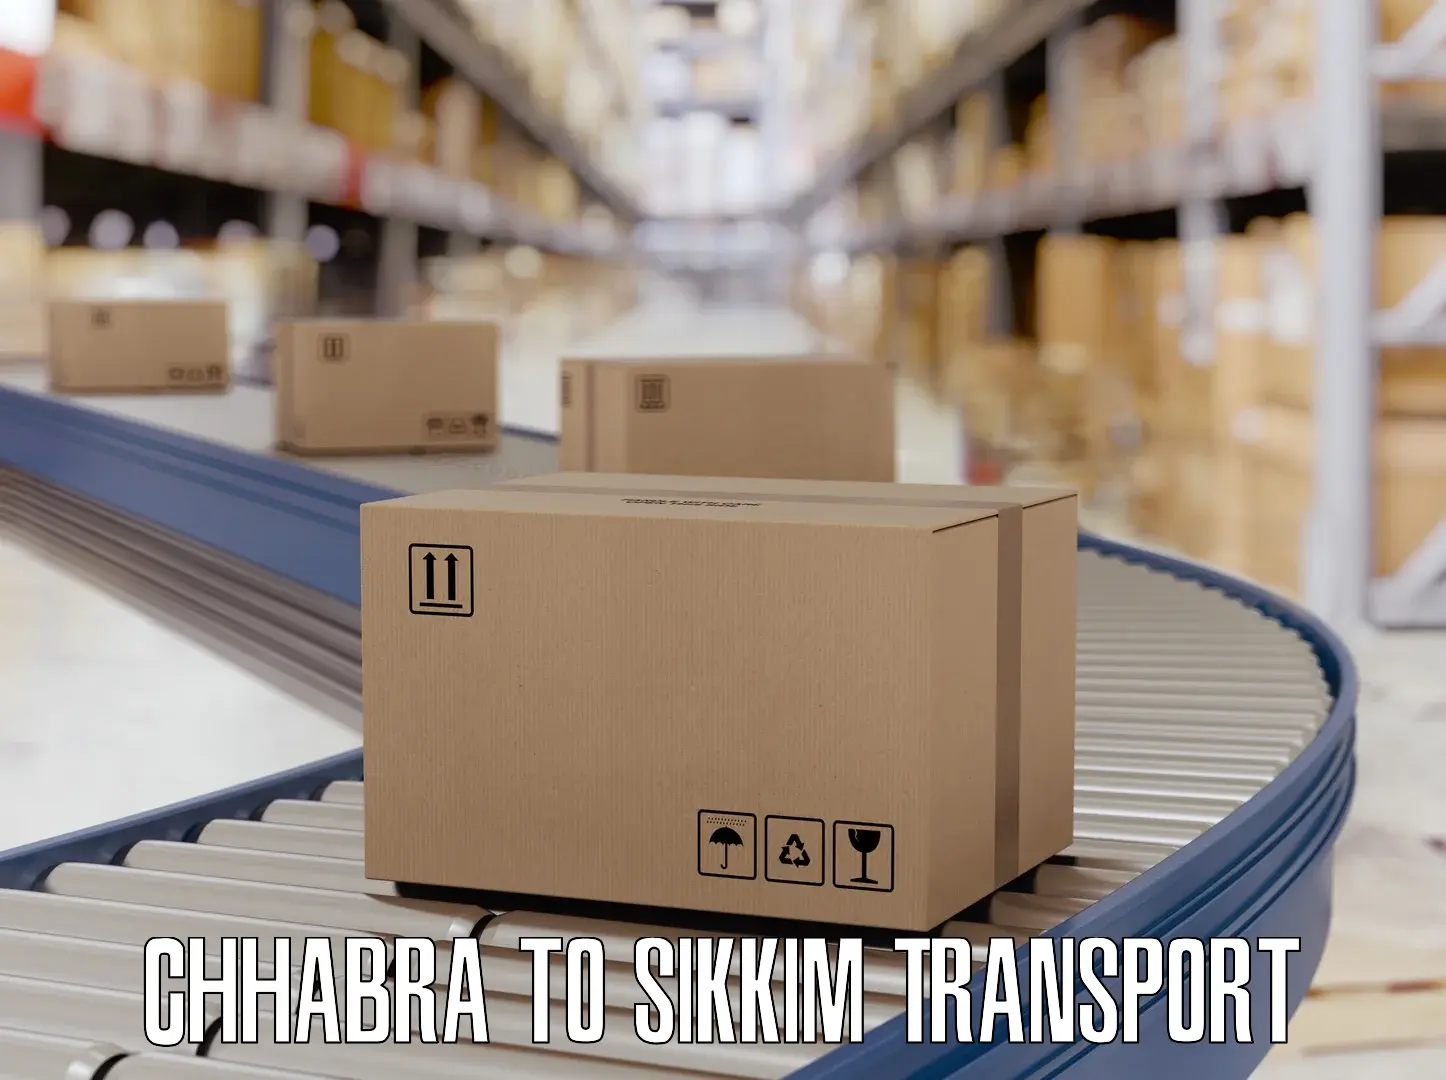 Express transport services Chhabra to Sikkim